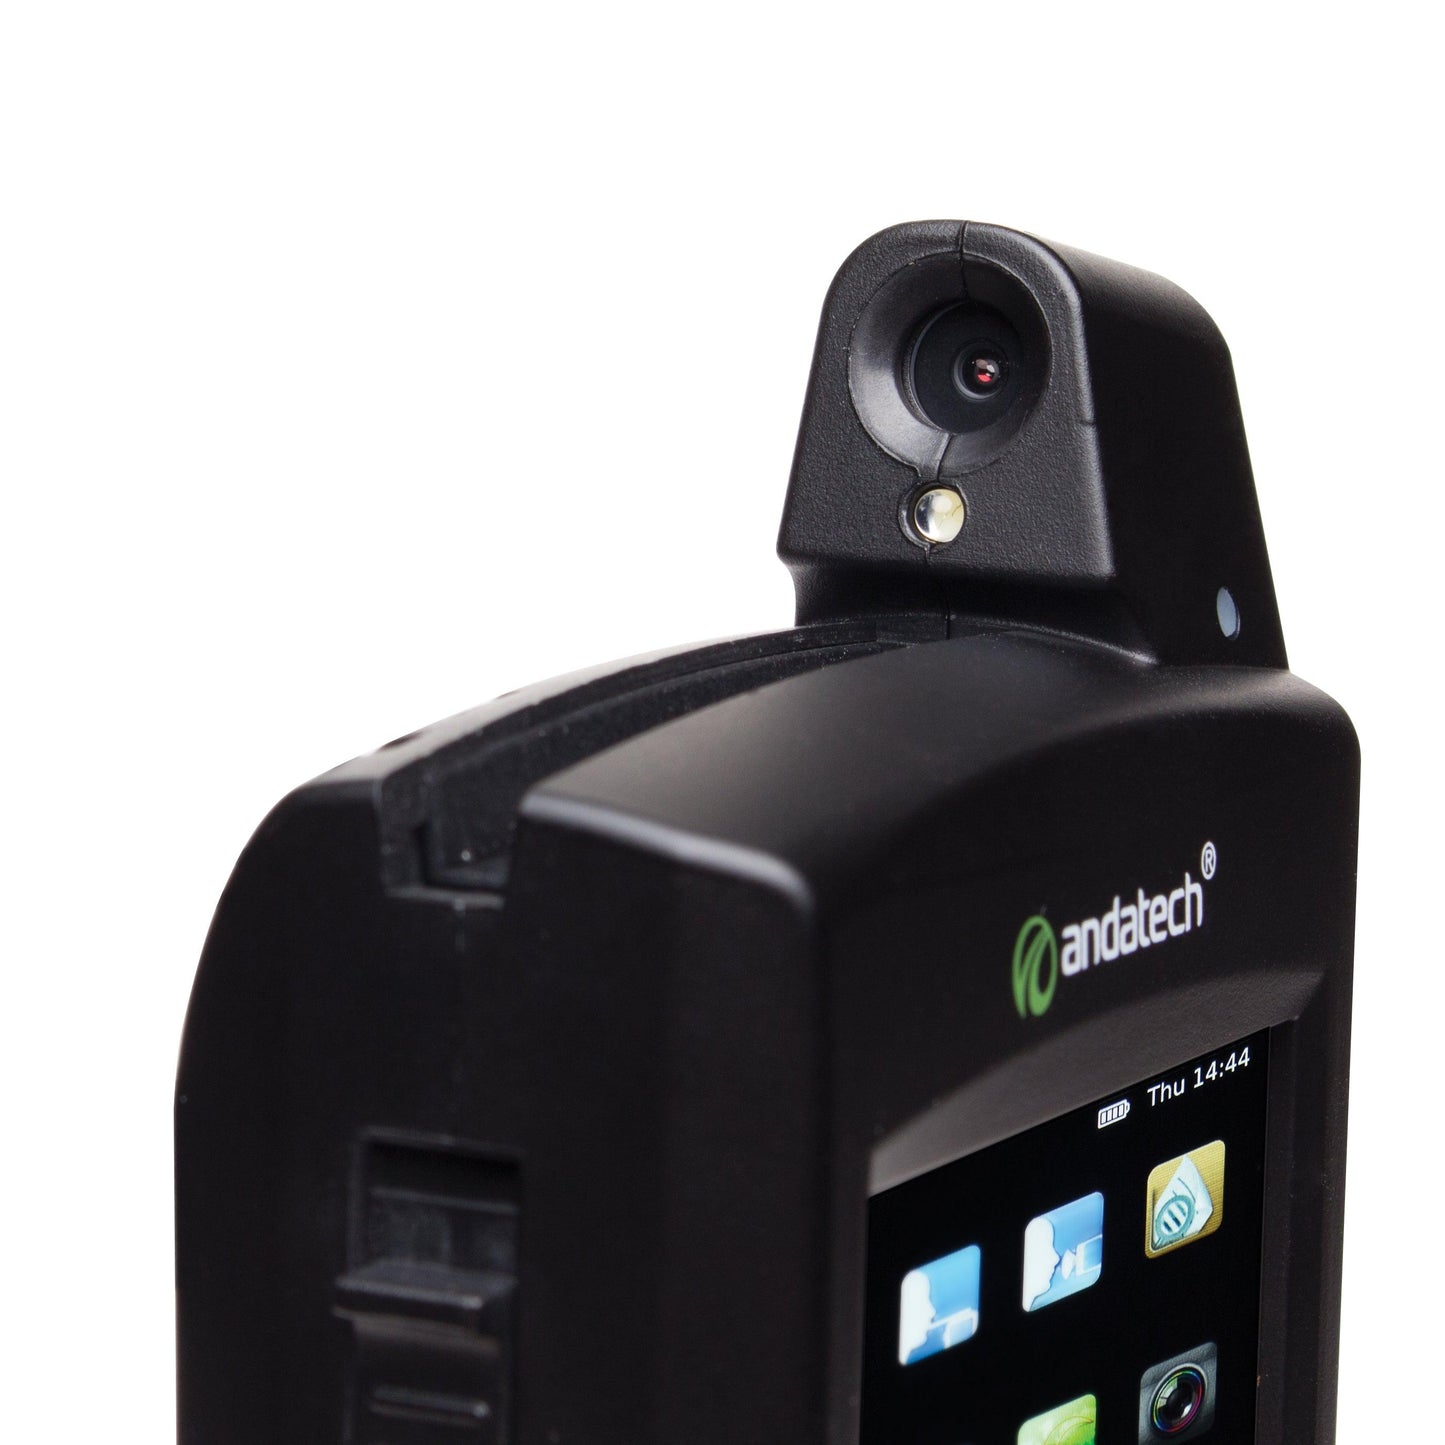 Breathalyser with built-in camera - Andatech Prodigy 3